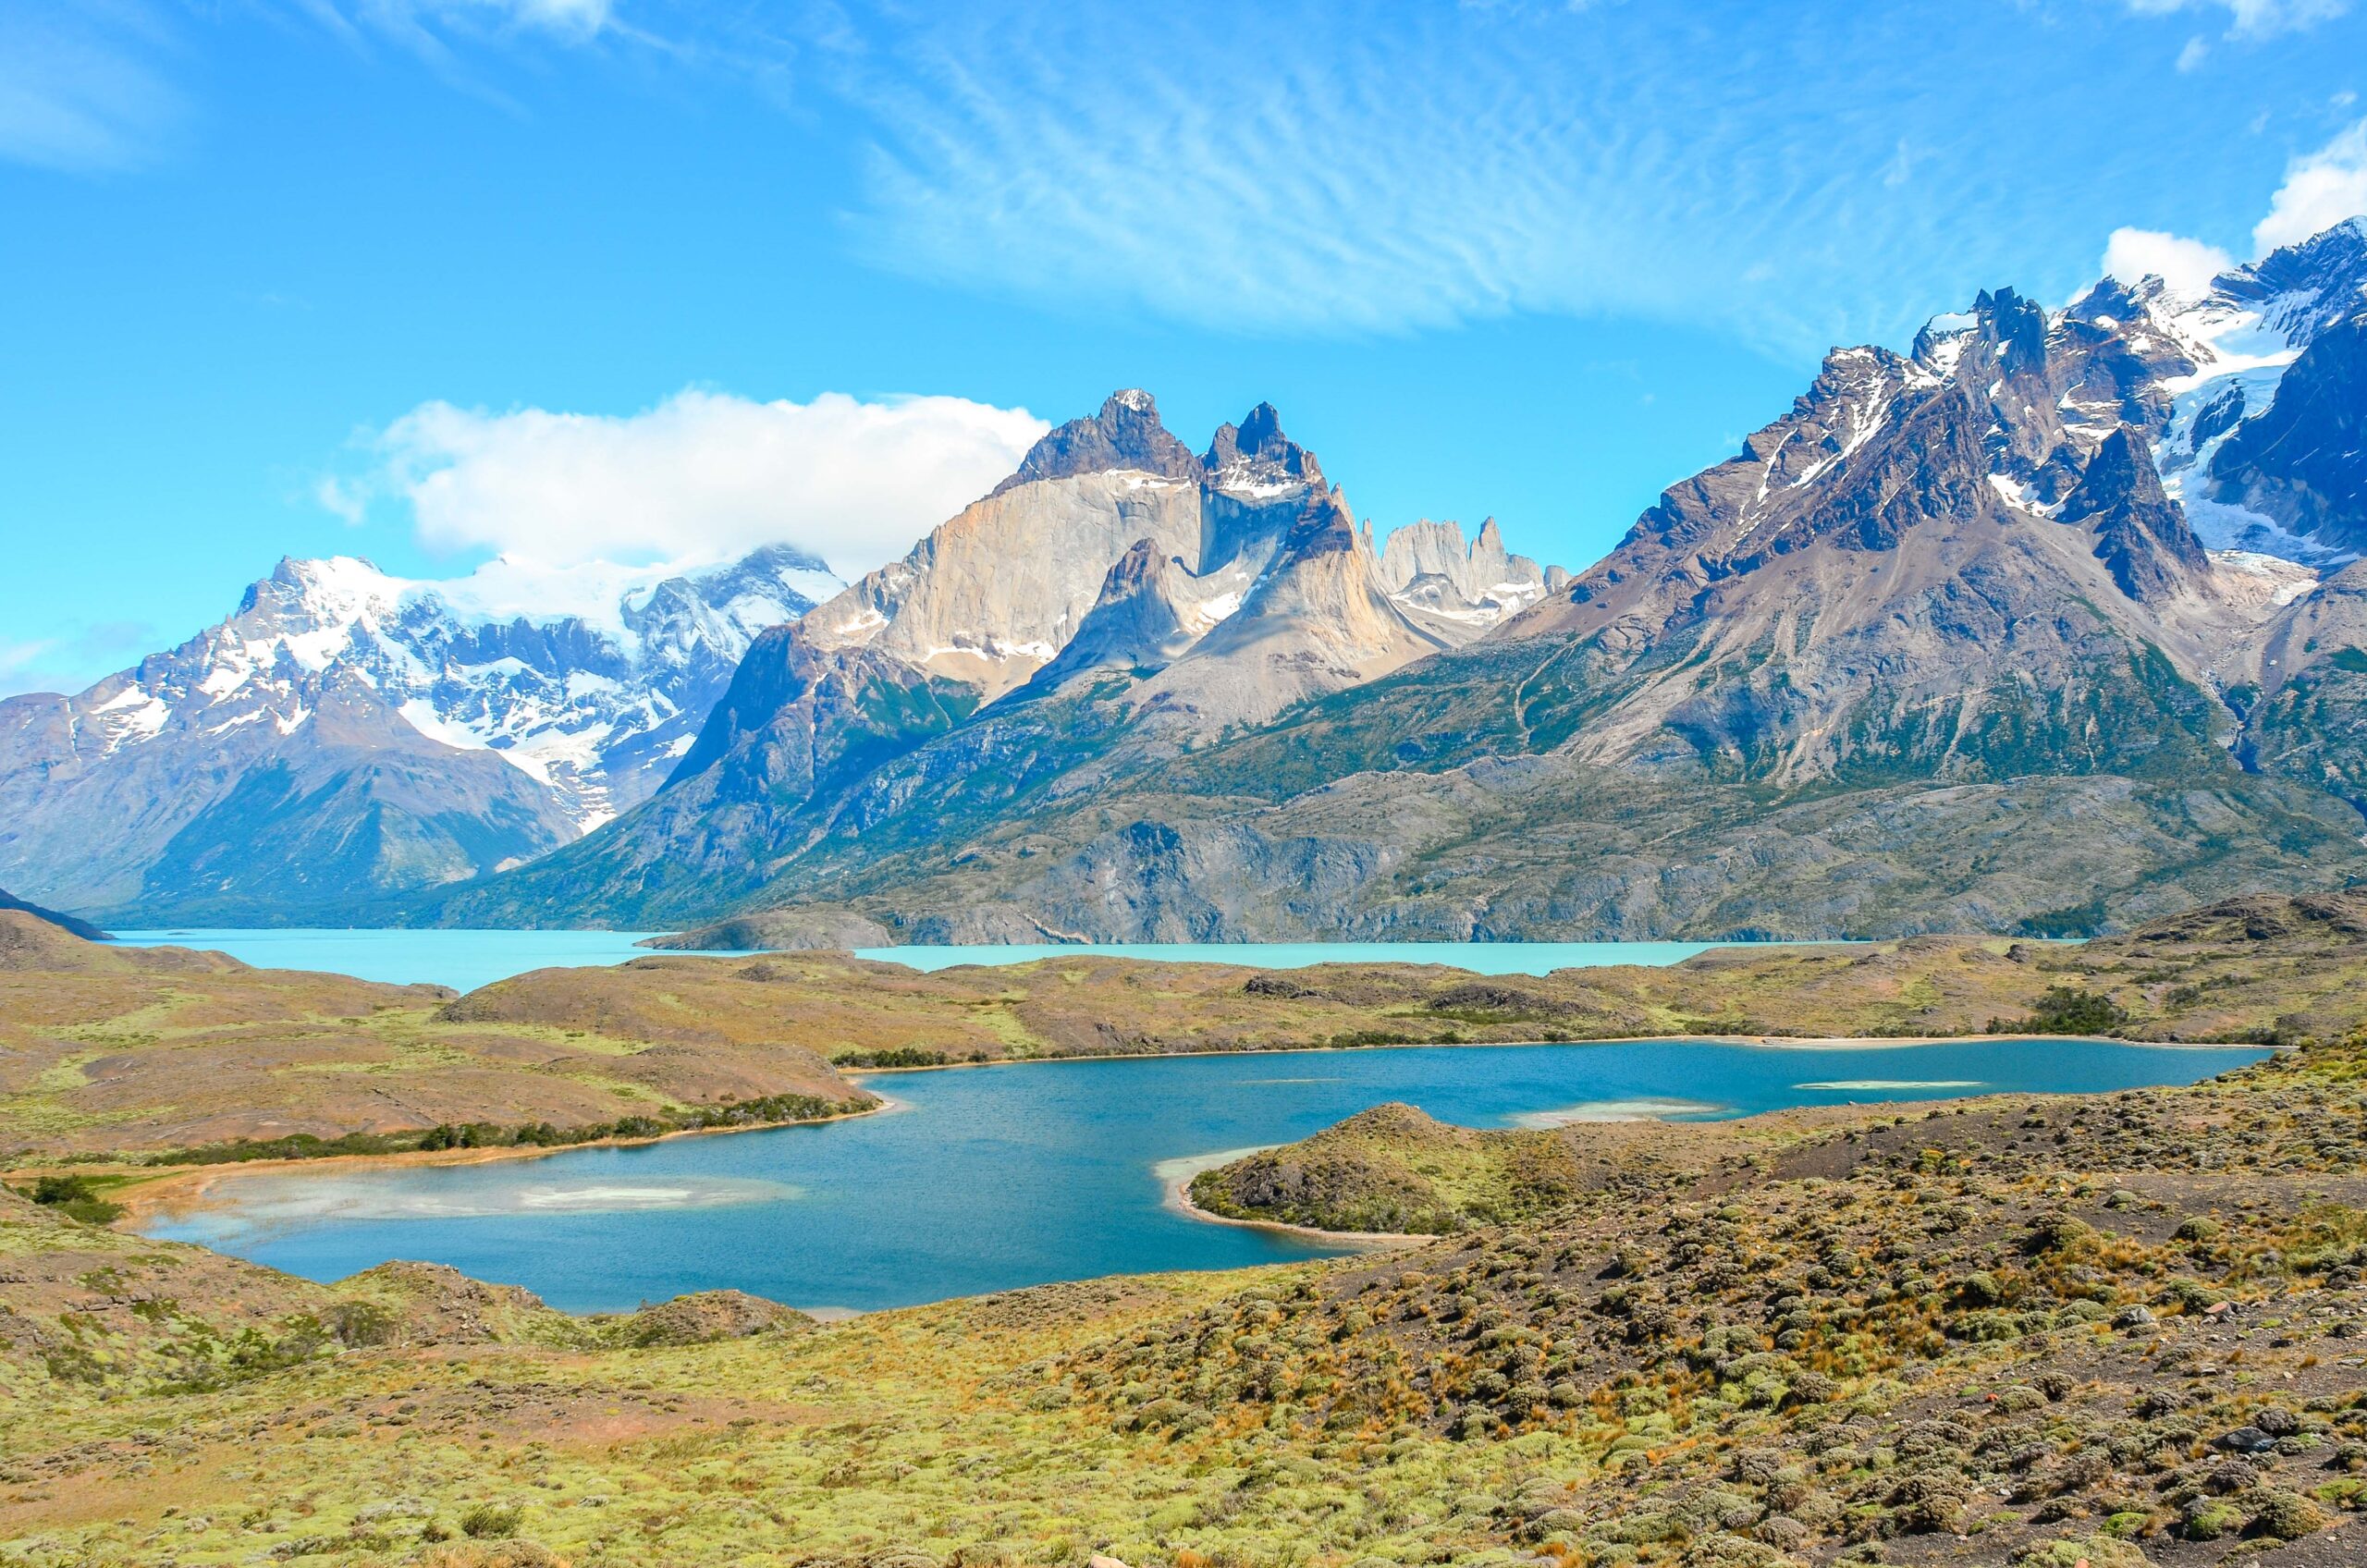 Spending 3 days in Torres del Paine National Park, Chilean Patagonia